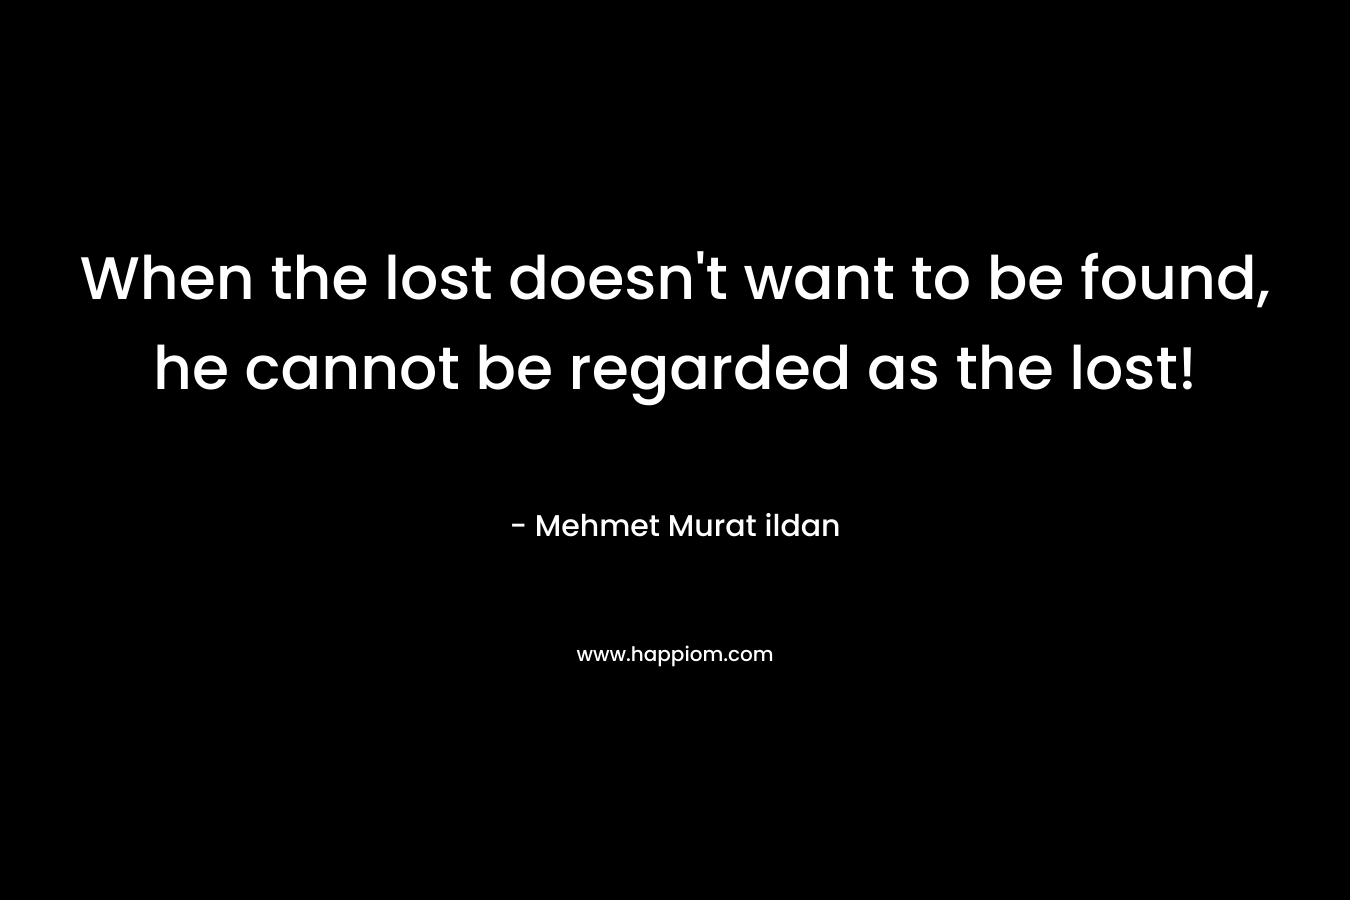 When the lost doesn't want to be found, he cannot be regarded as the lost!